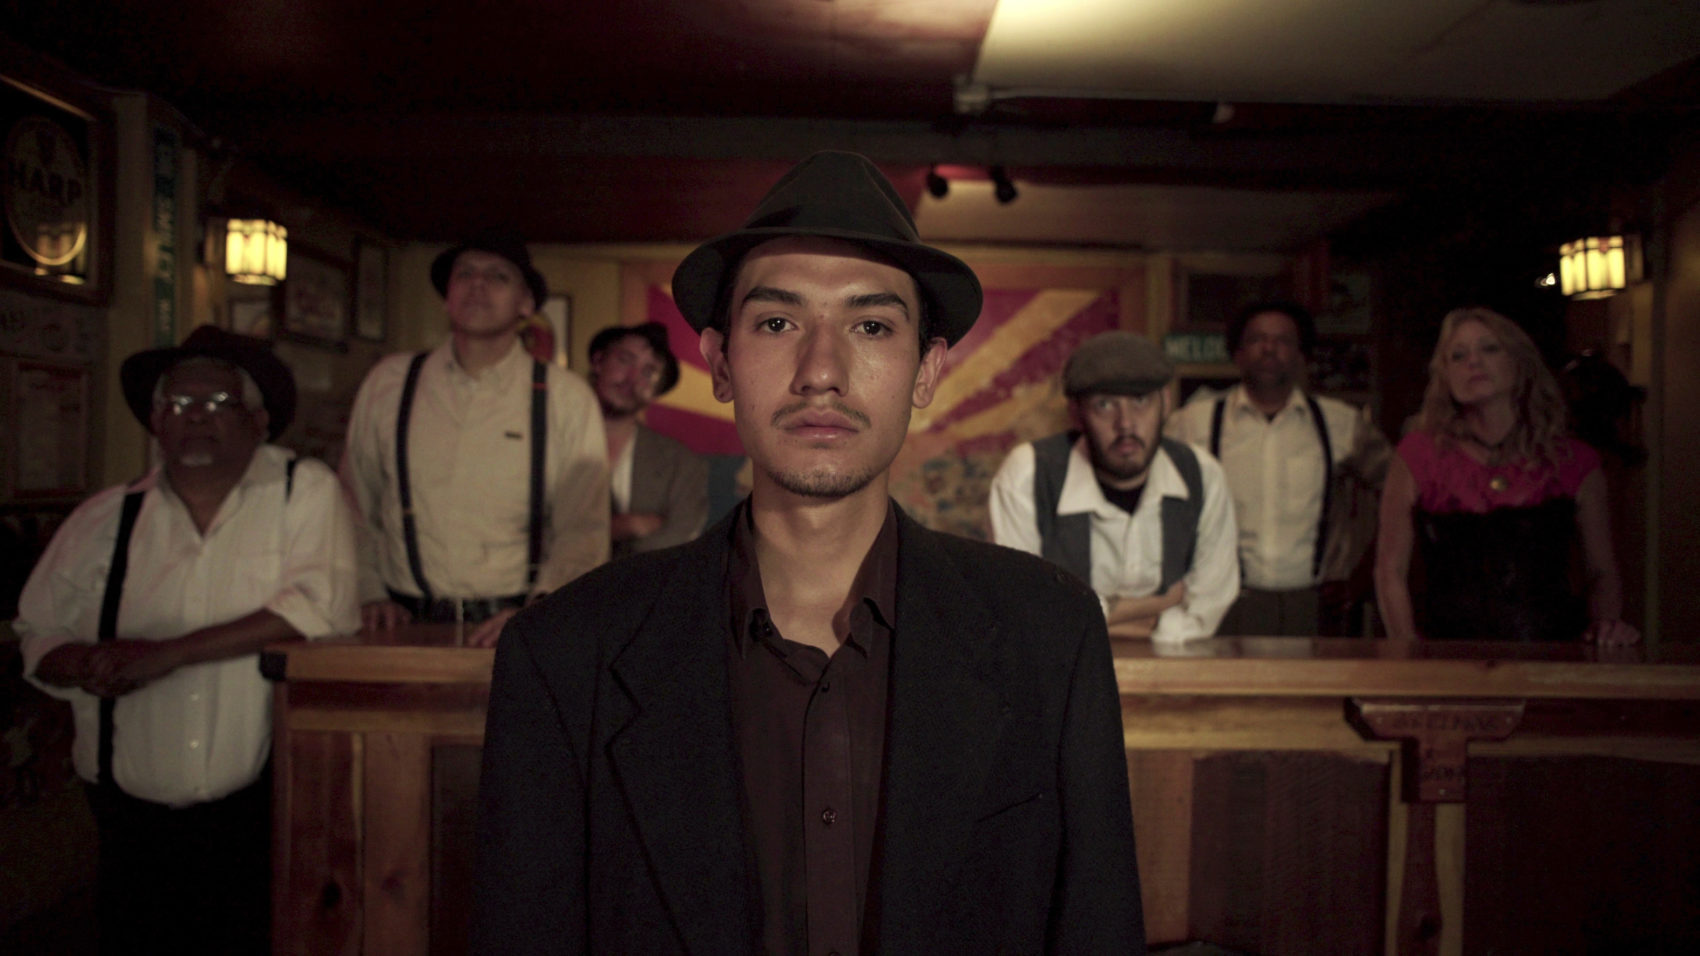 Fernando Serrano, who plays a striking miner in &quot;Bisbee '17,&quot; a story of nearly 2,000 miners, most of them immigrants, were pulled violently from their homes and businesses in Bisbee, Ariz., for deportation to the New Mexico desert in 1917. (Jarred Alterman/4th Row Films via AP)